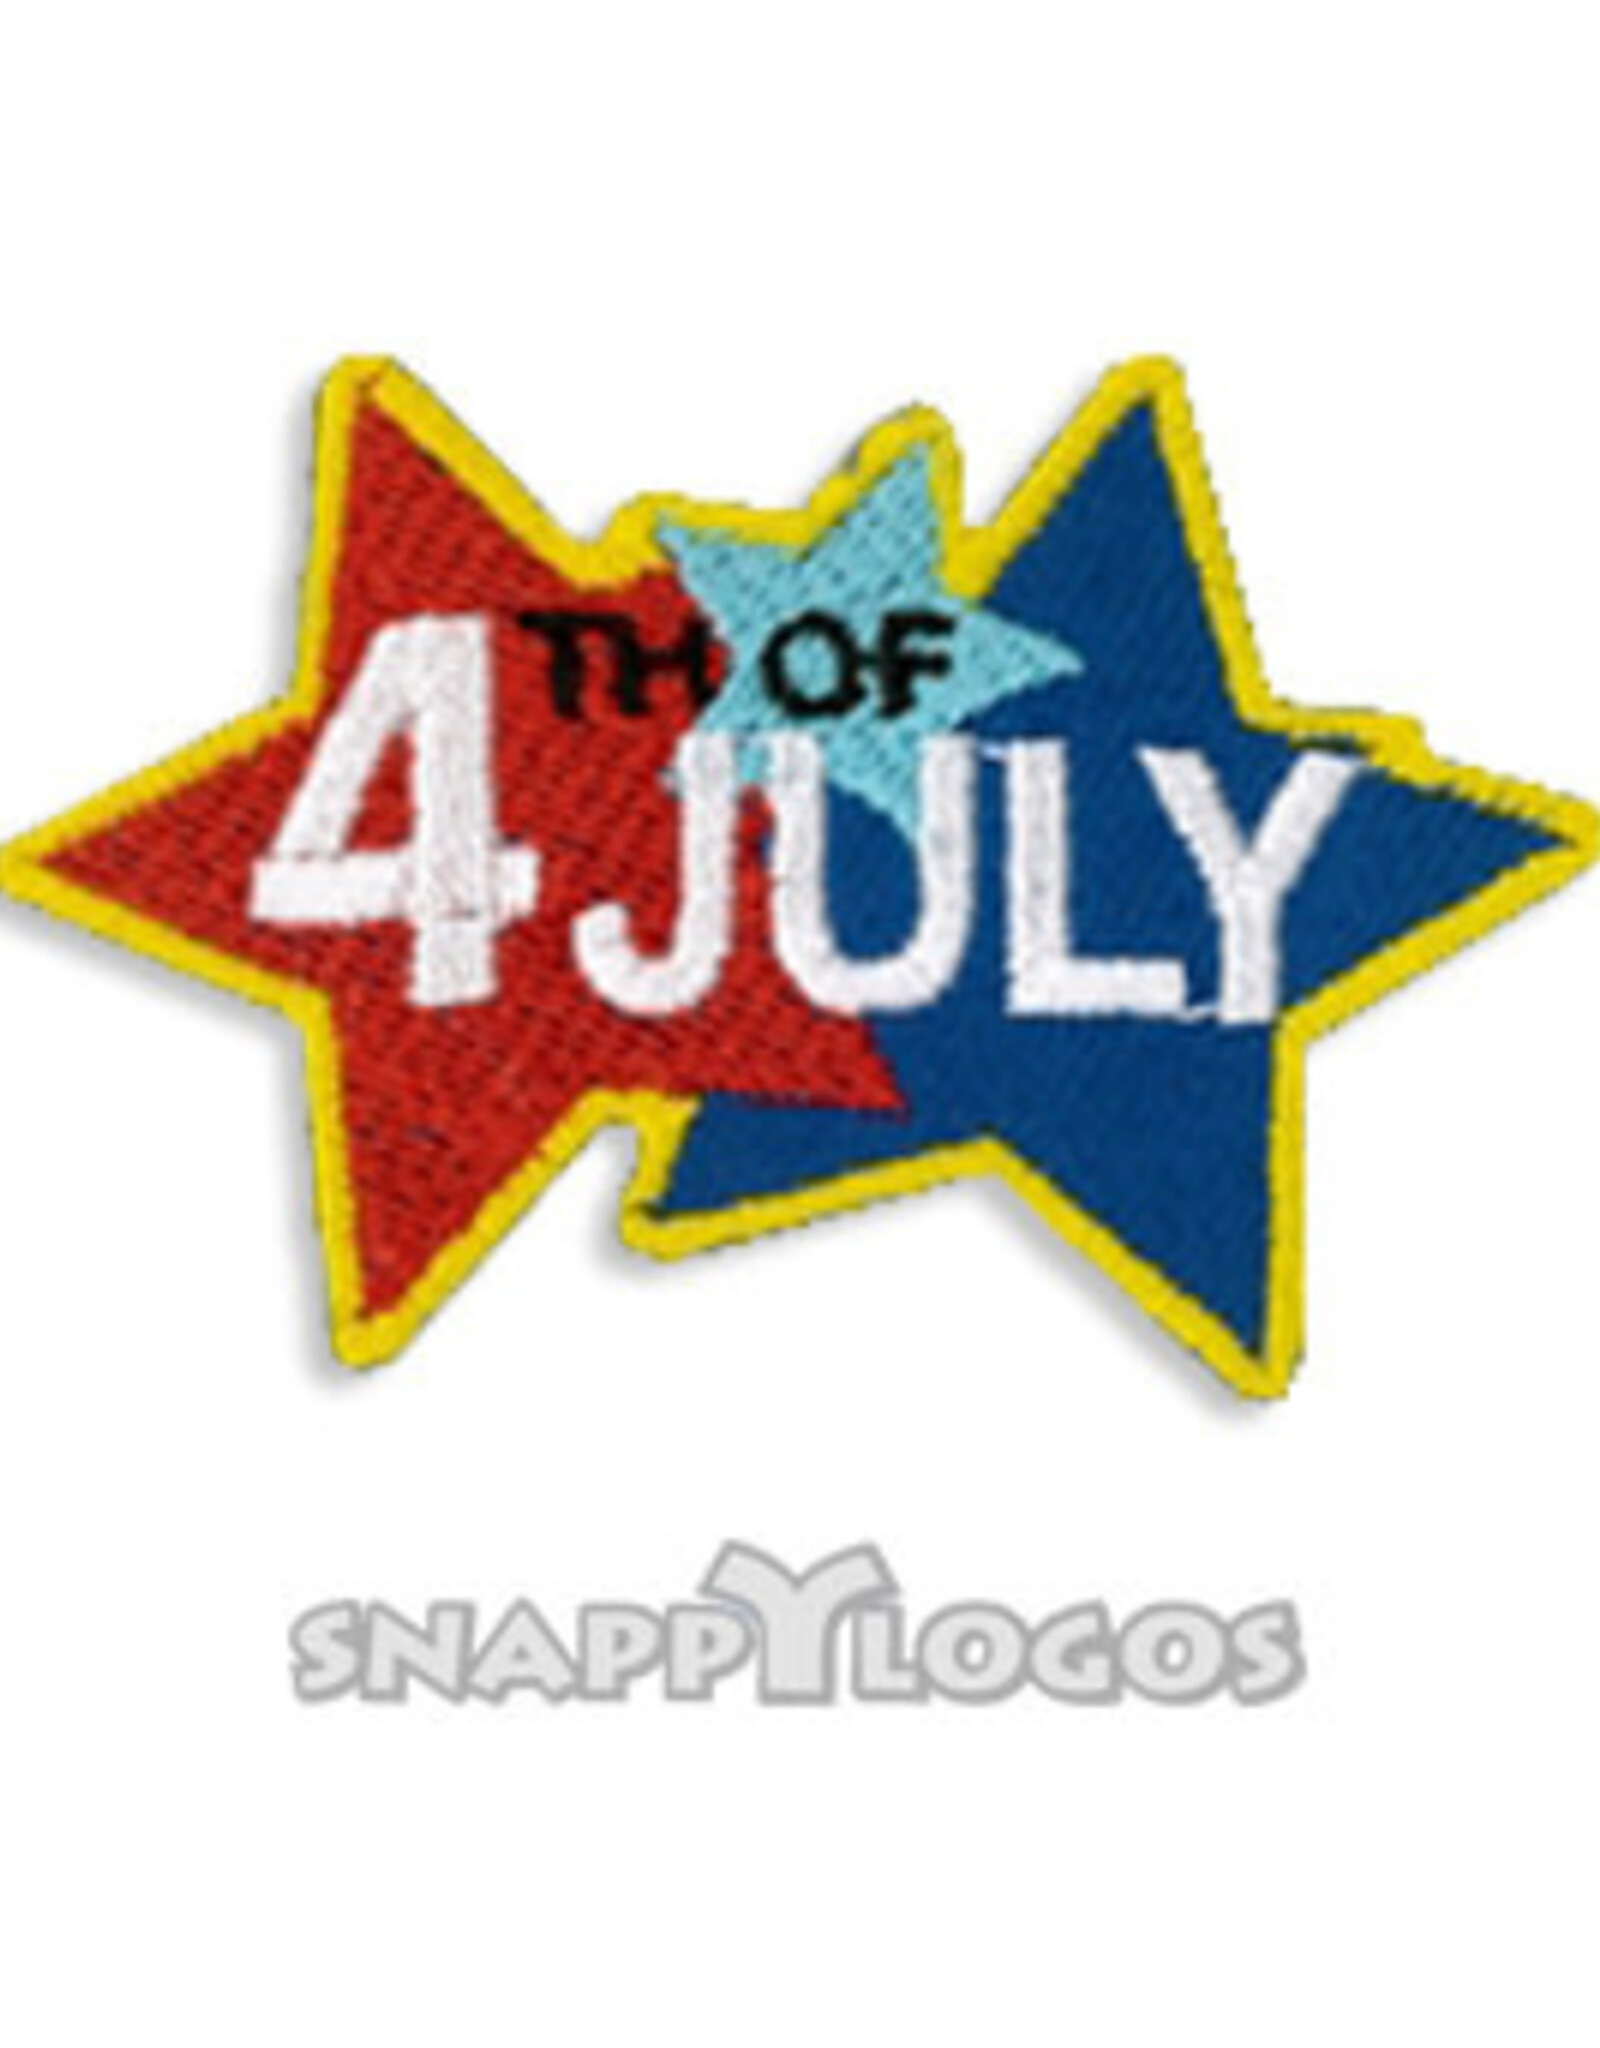 snappylogos 4th of July (Stars) Fun Patch (8655)